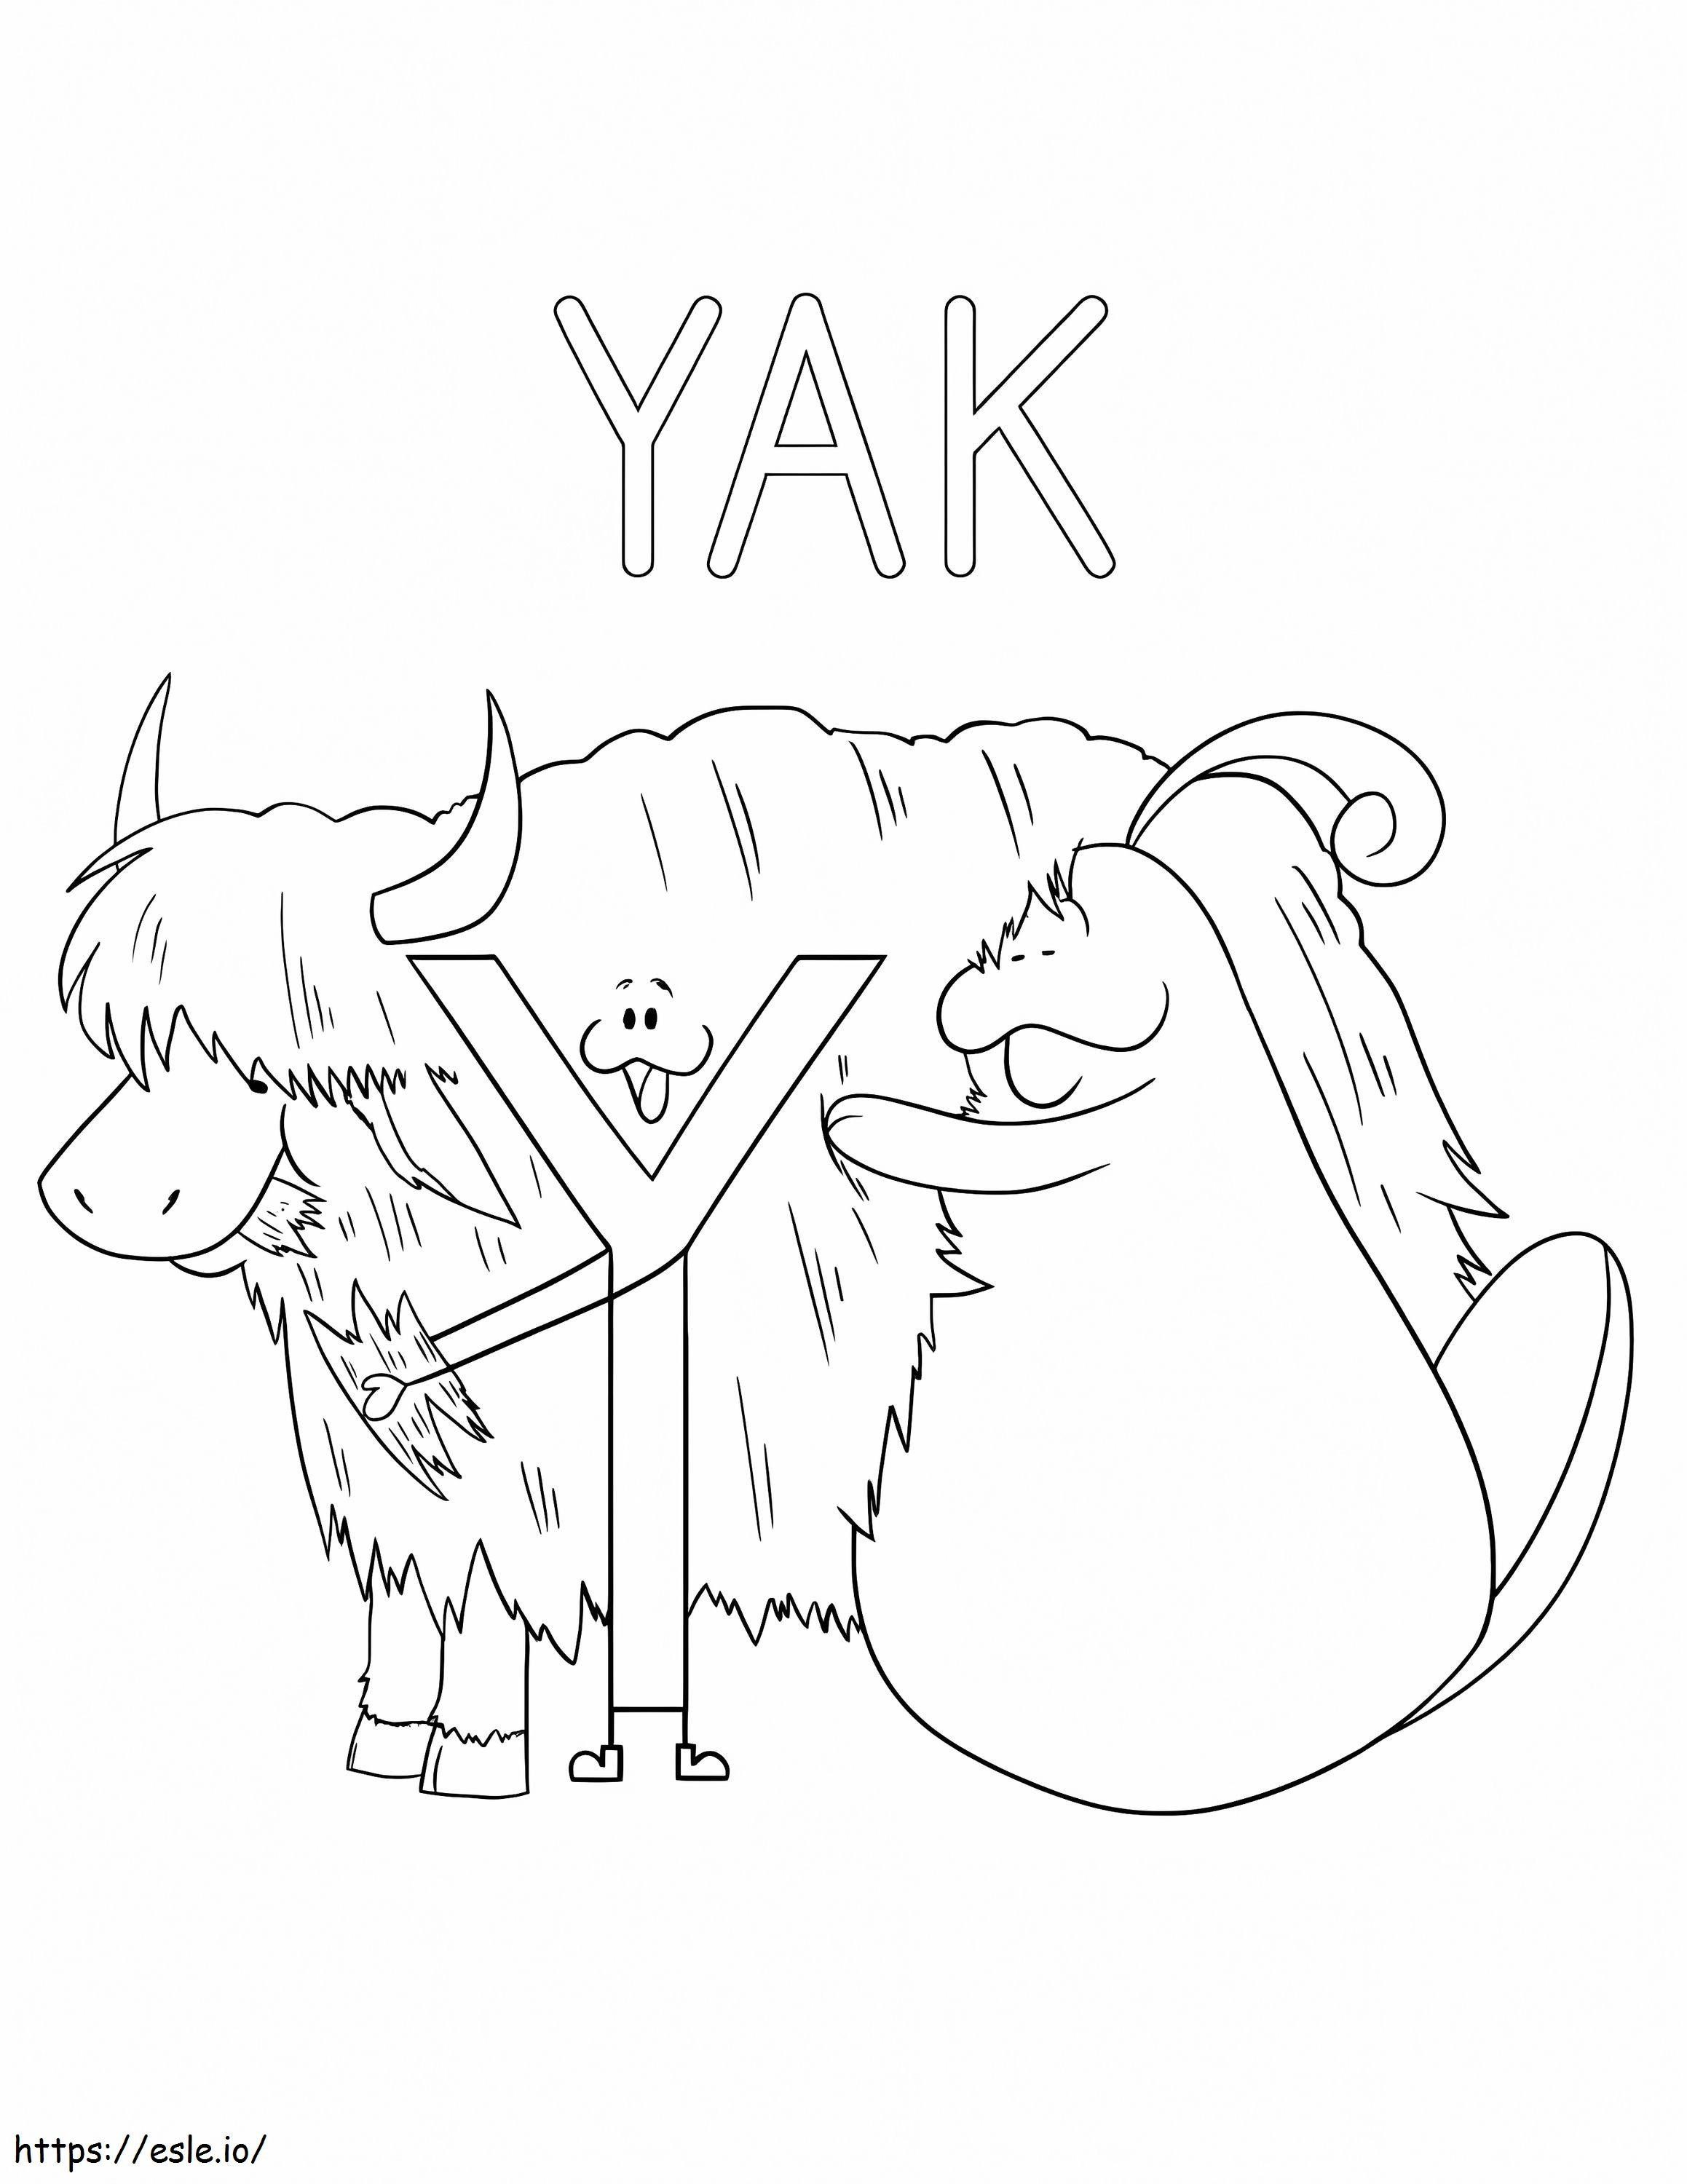 Yak Letter Y 1 coloring page